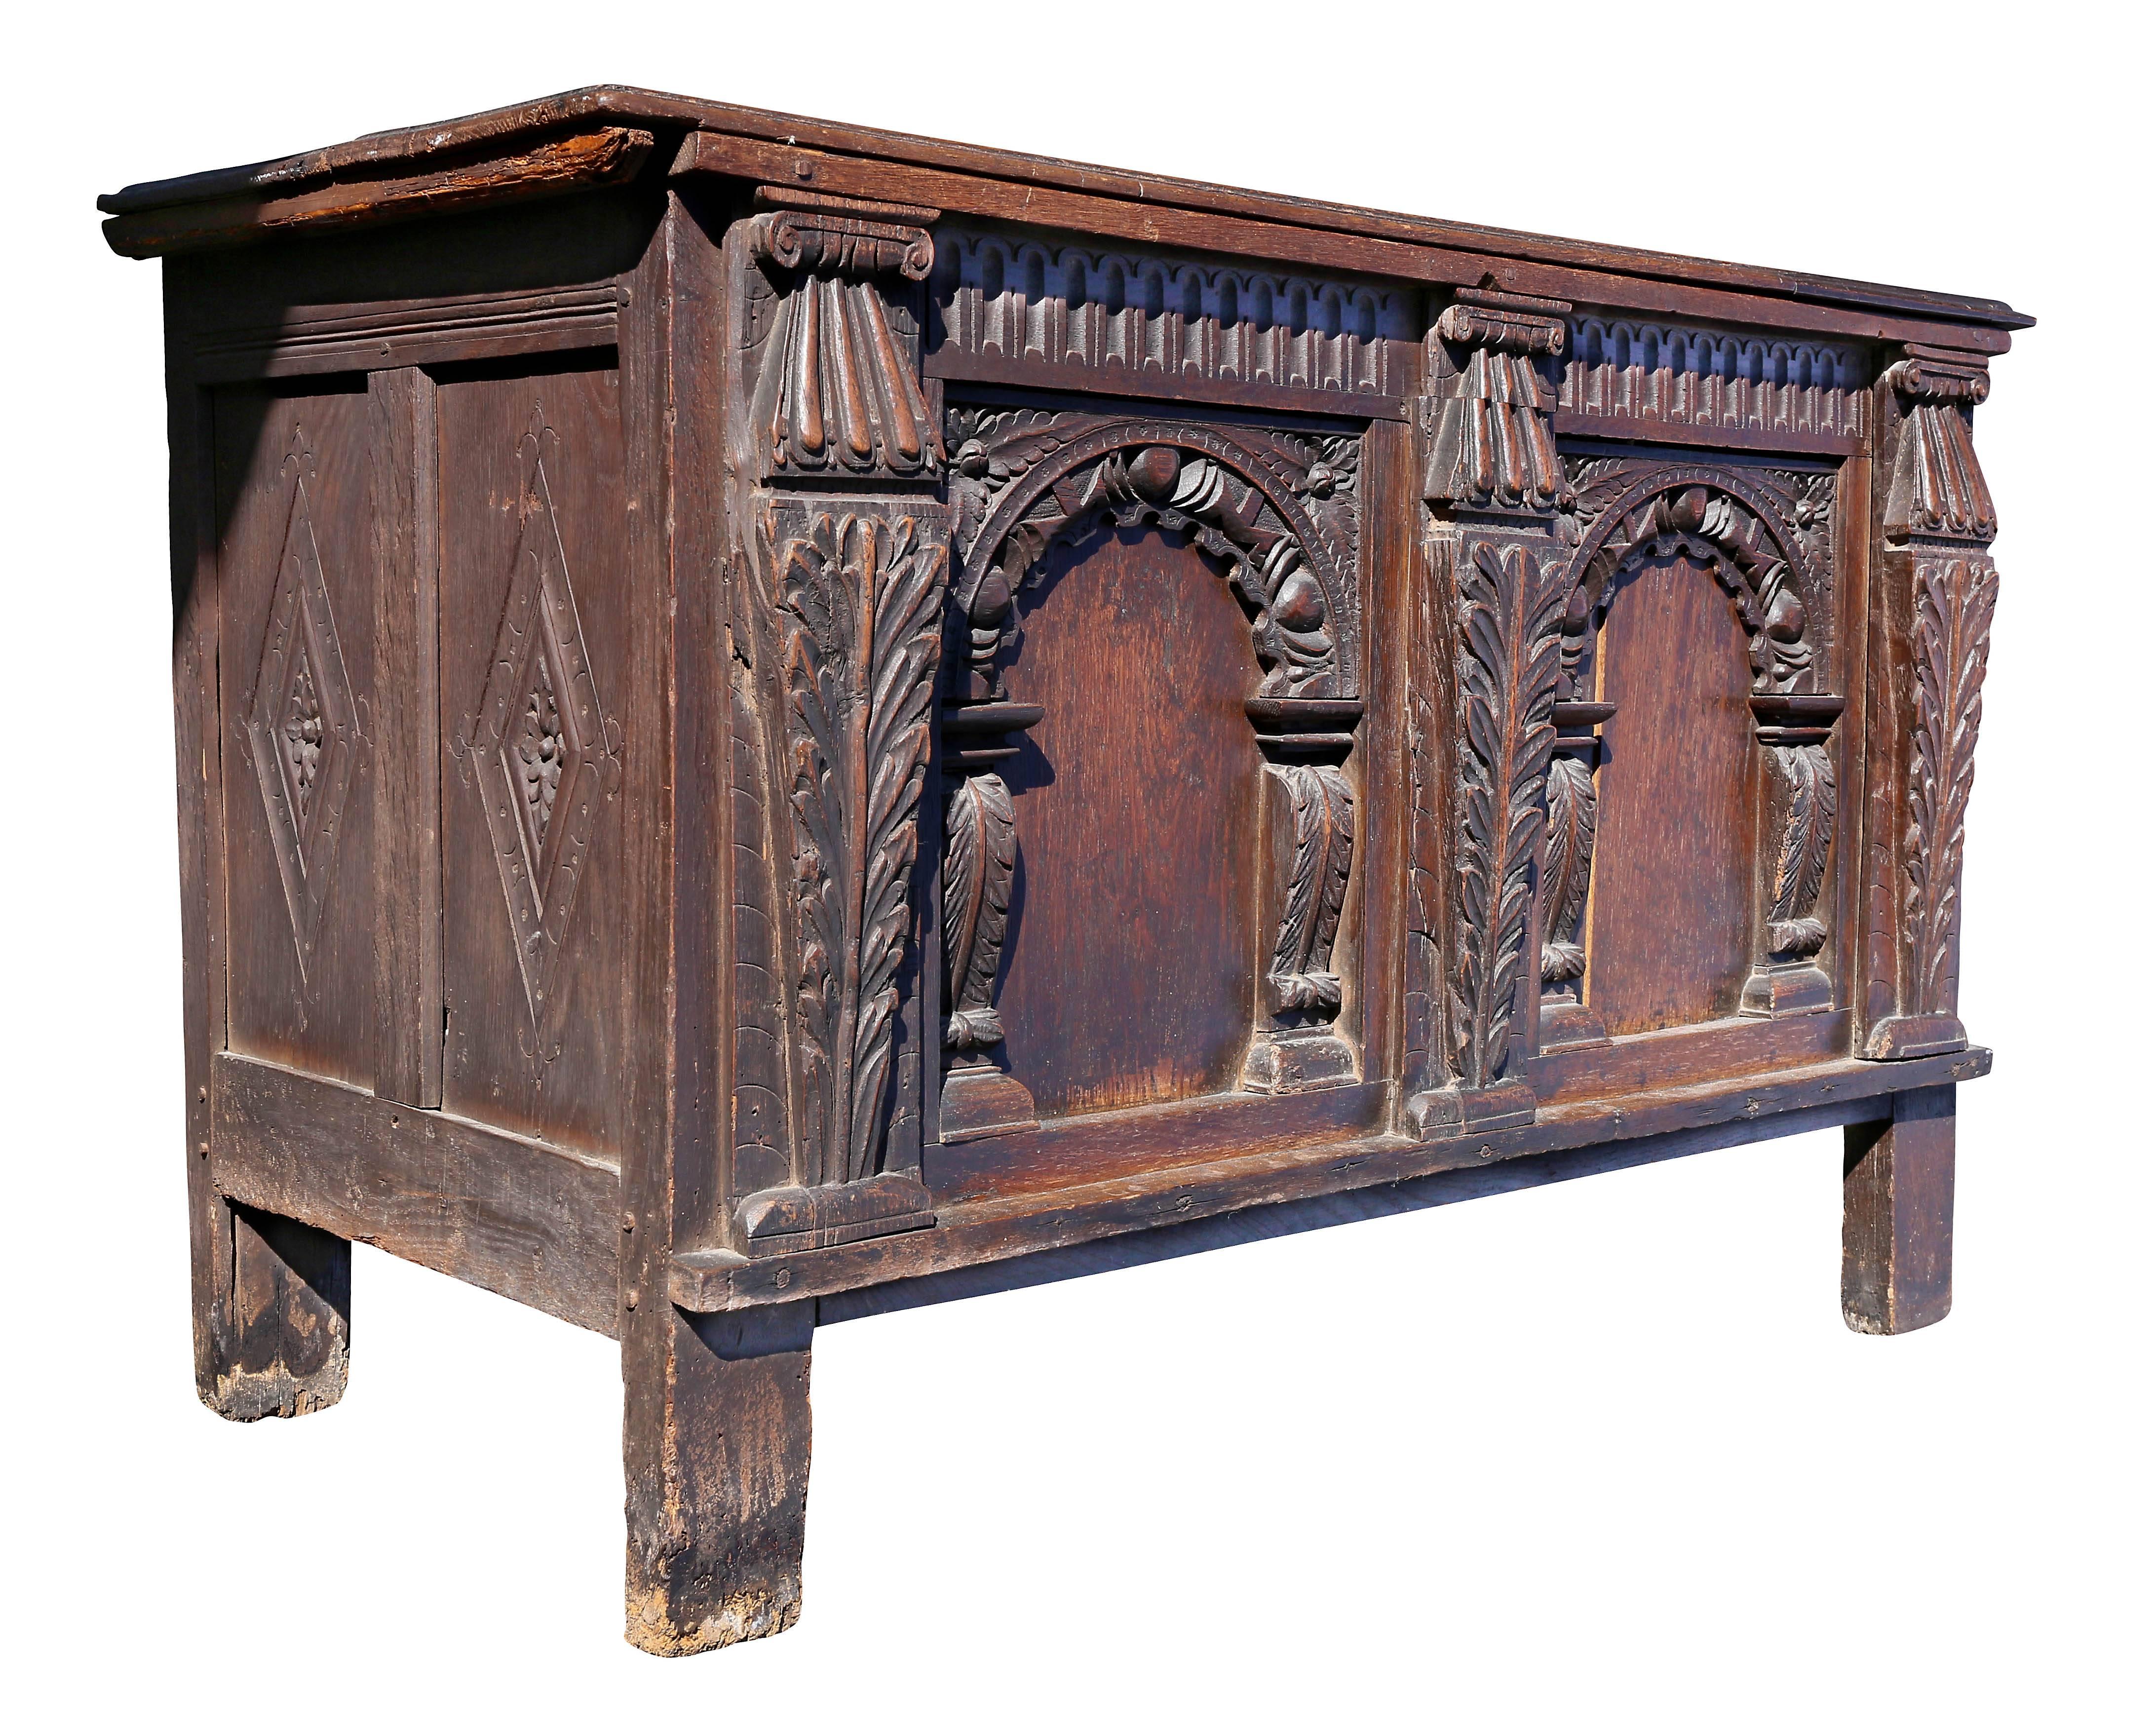 With a two board top over a case section with two panels each with carved arches flanked by acanthus leaf carved columns raised on stile feet.